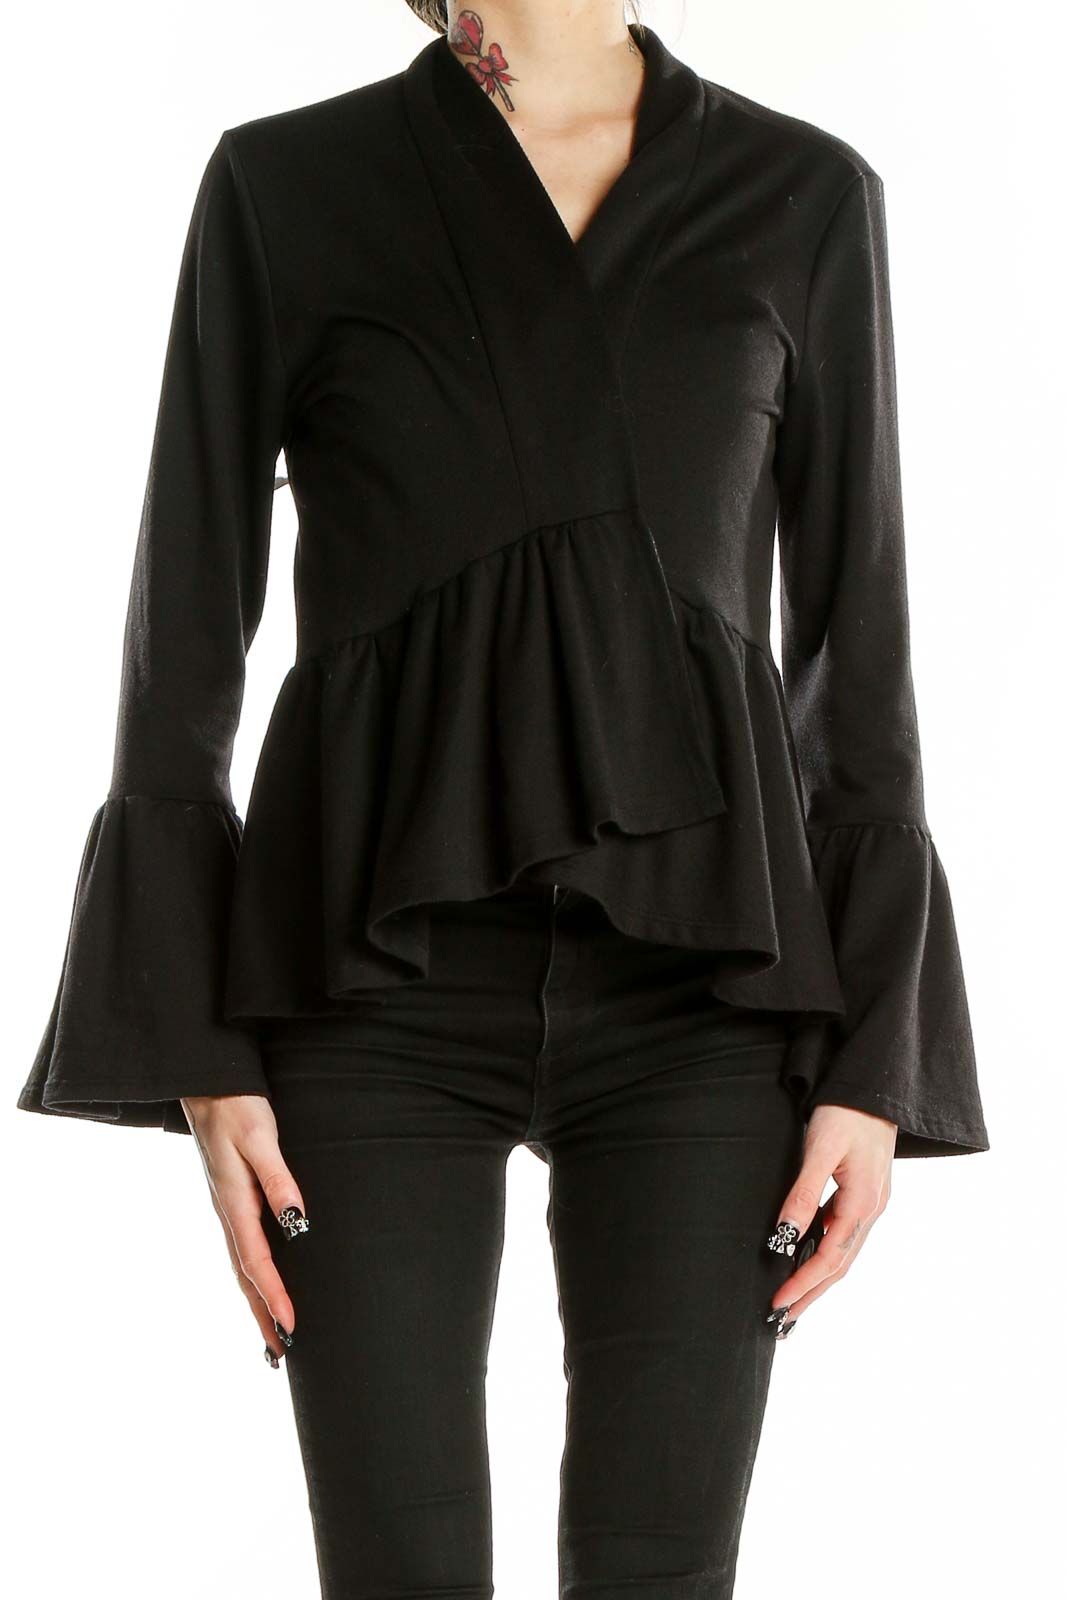 Black Bell Sleeve Cardigan Front